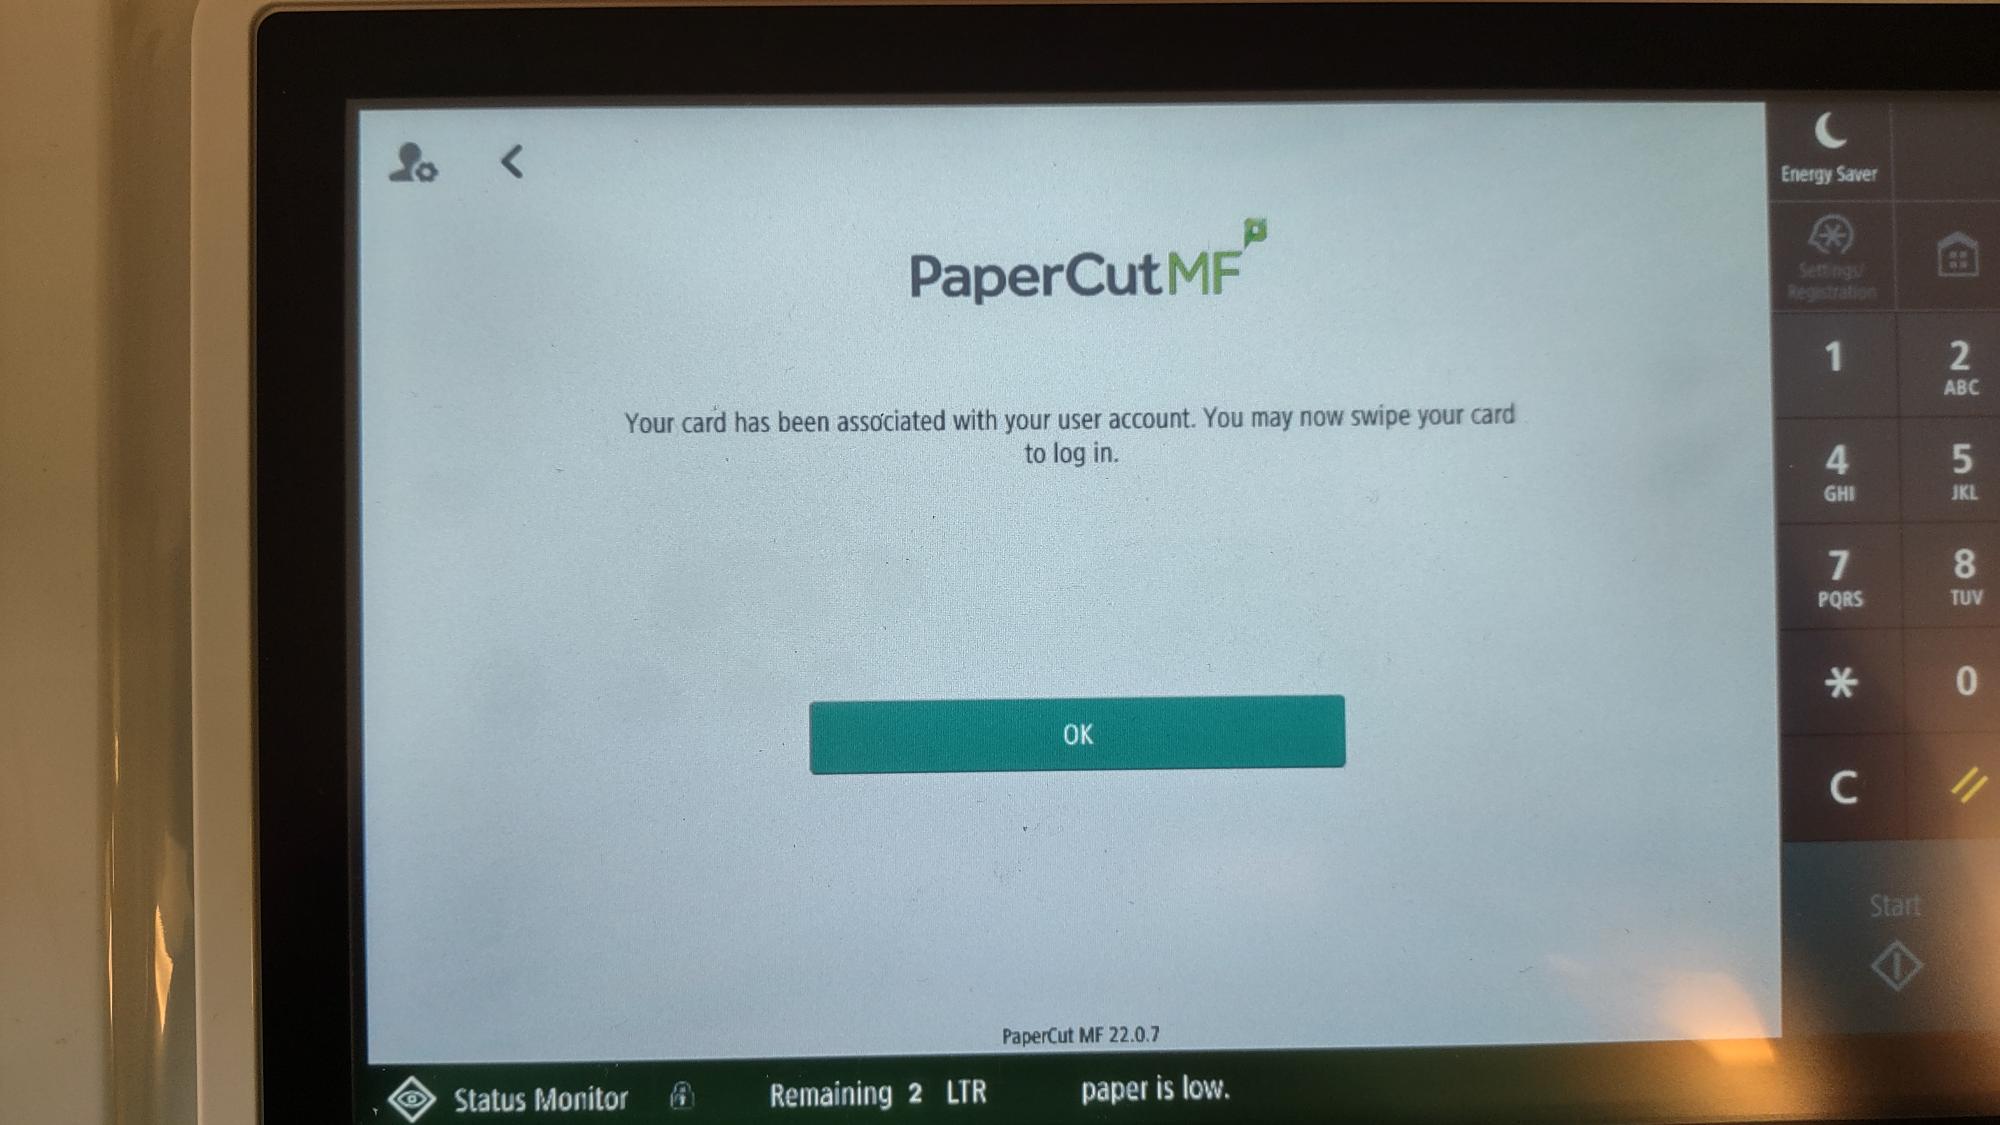 Printer display with the message "Your card has been associated with your user account. you may now swipe your card to log in."